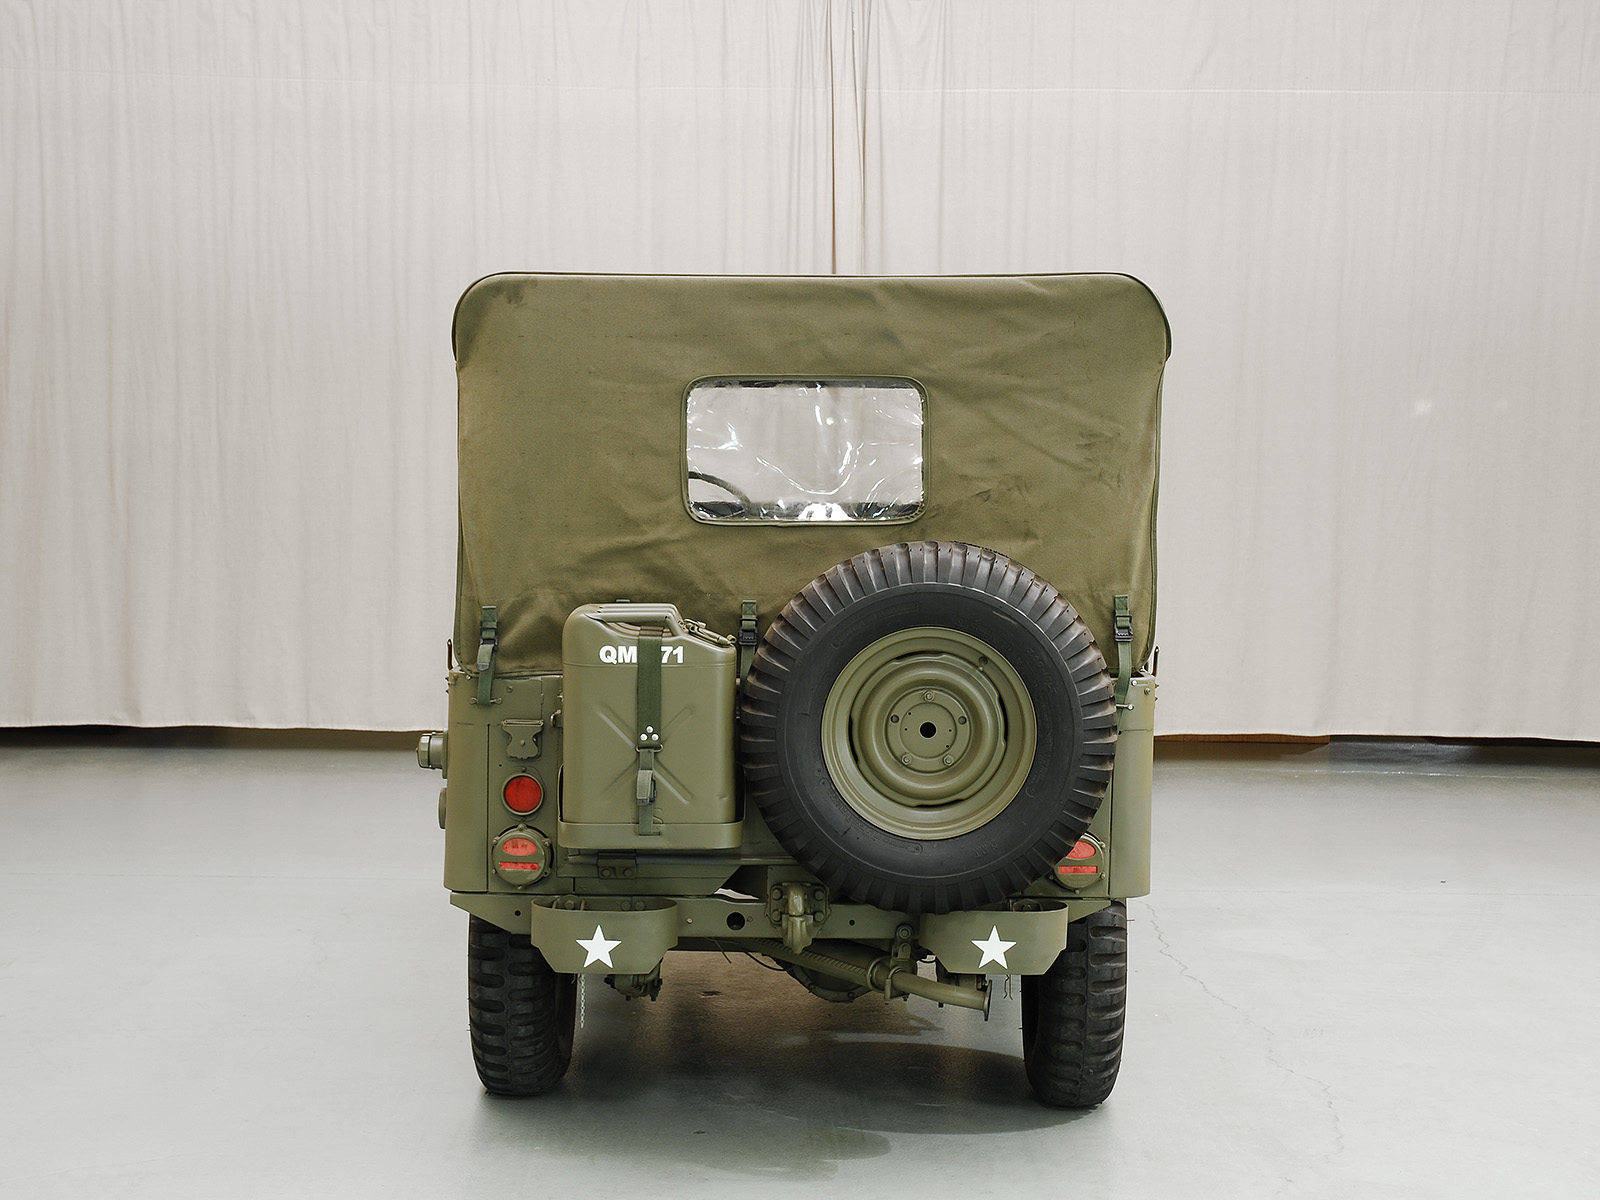 1960 willys-overland m38a1 1/4 ton